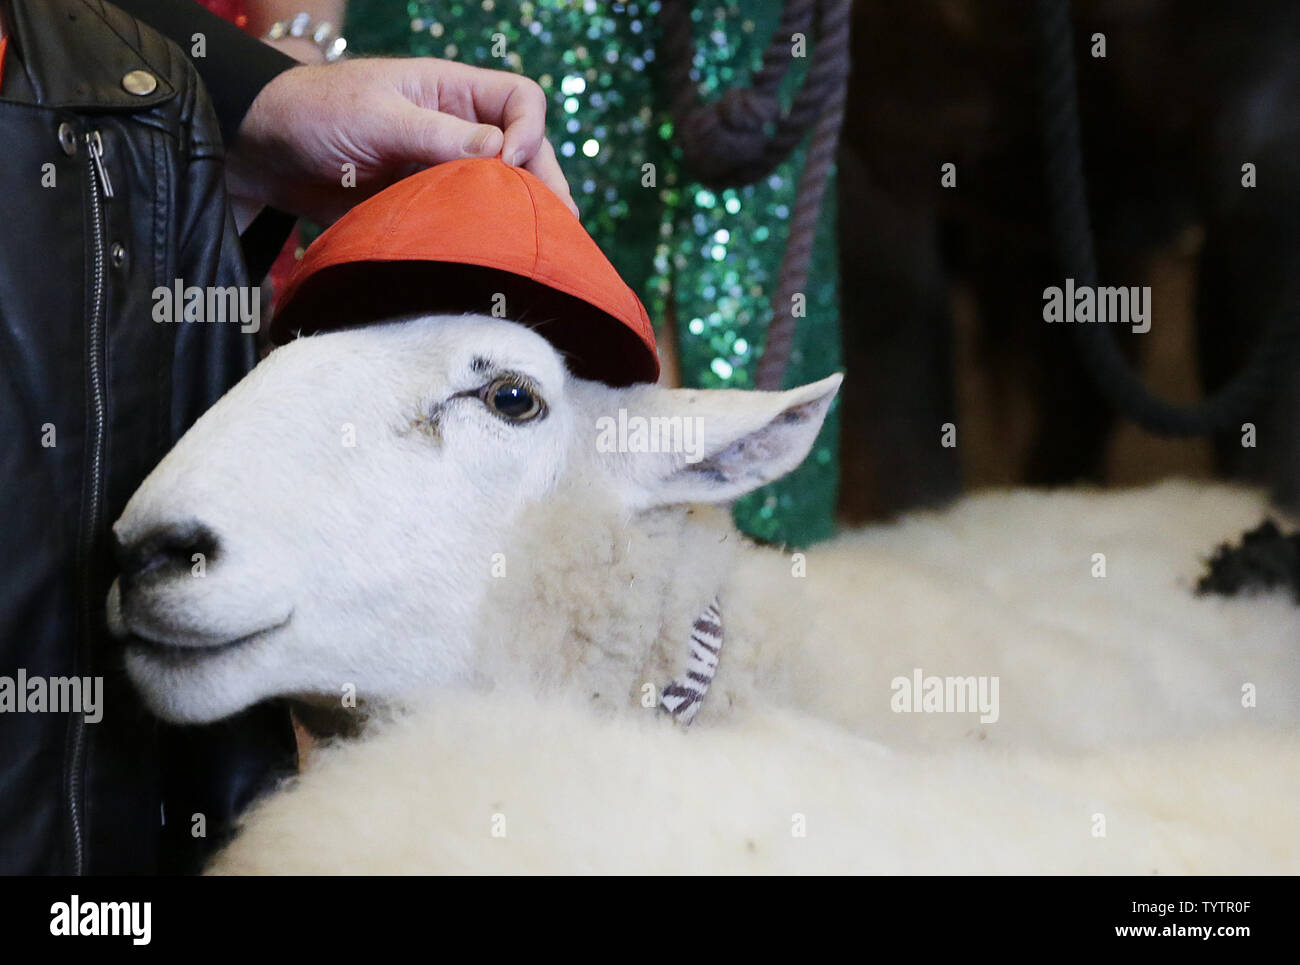 New York Archbishop Cardinal Timothy Dolan puts his Zucchetto Red Skull cap on a sheep held by a Radio City Rockettes dancer when they attends a ceremony blessing the animals that will appear in the Radio City Christmas Spectacular at Radio City Music Hall on November 5, 2018 in New York City. The 'Living Nativity' scene has been a part of the production since its inception in 1933.      Photo by John Angelillo/UPI Stock Photo